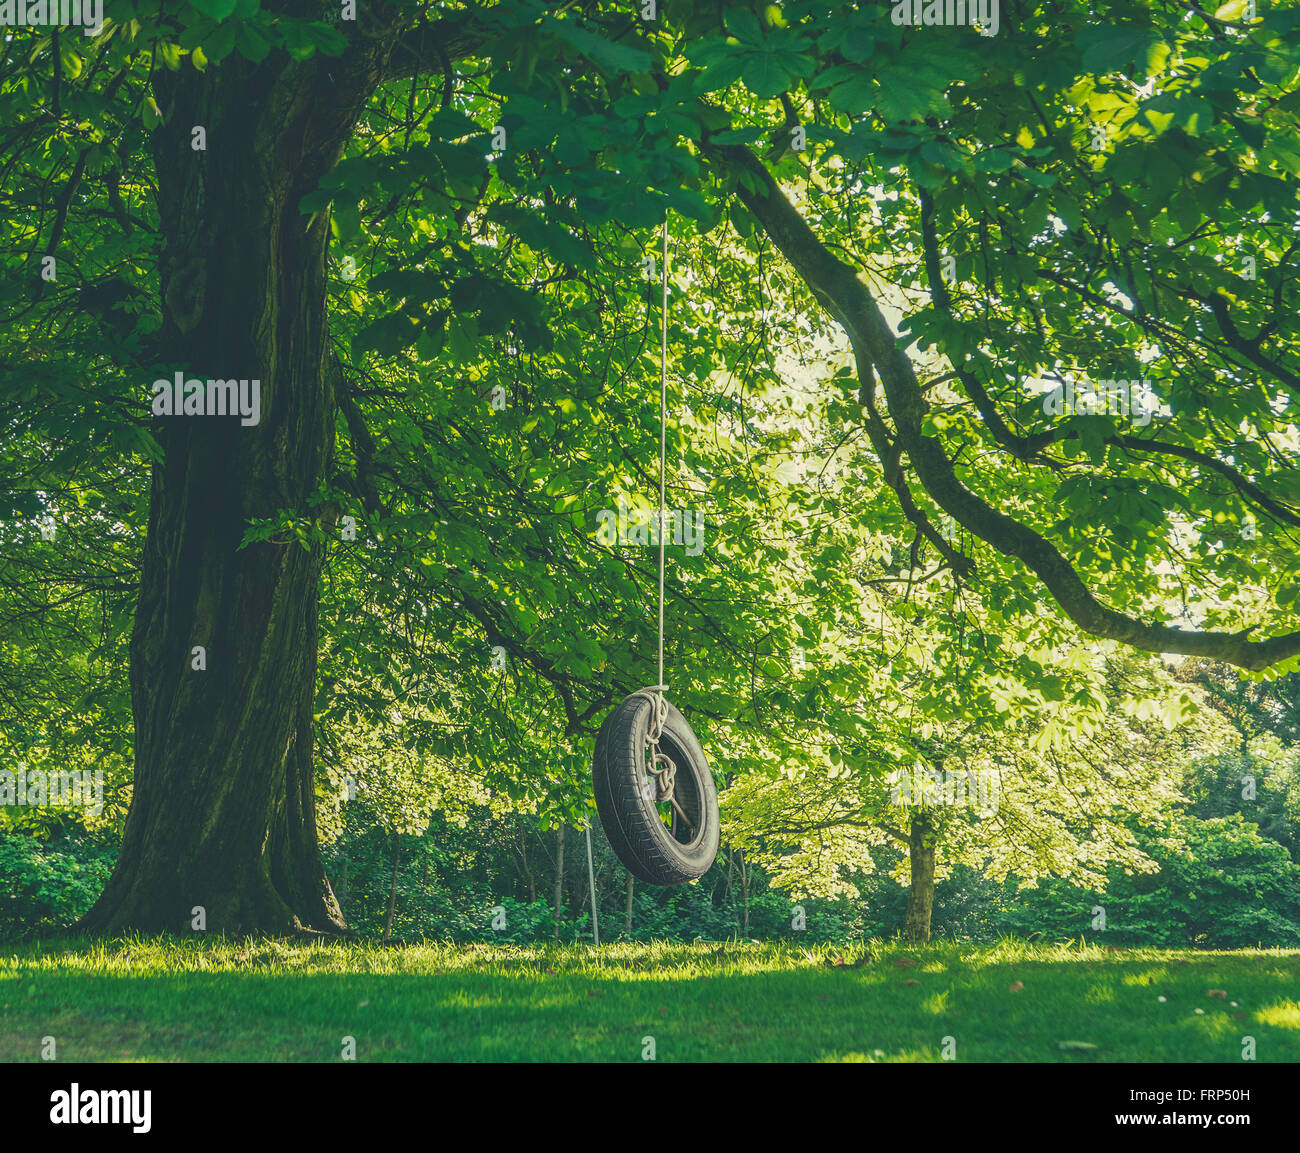 Childhood Nostalgia Image Of a Tire Swing Hanging From A Tree On A Summer's Afternoon Stock Photo